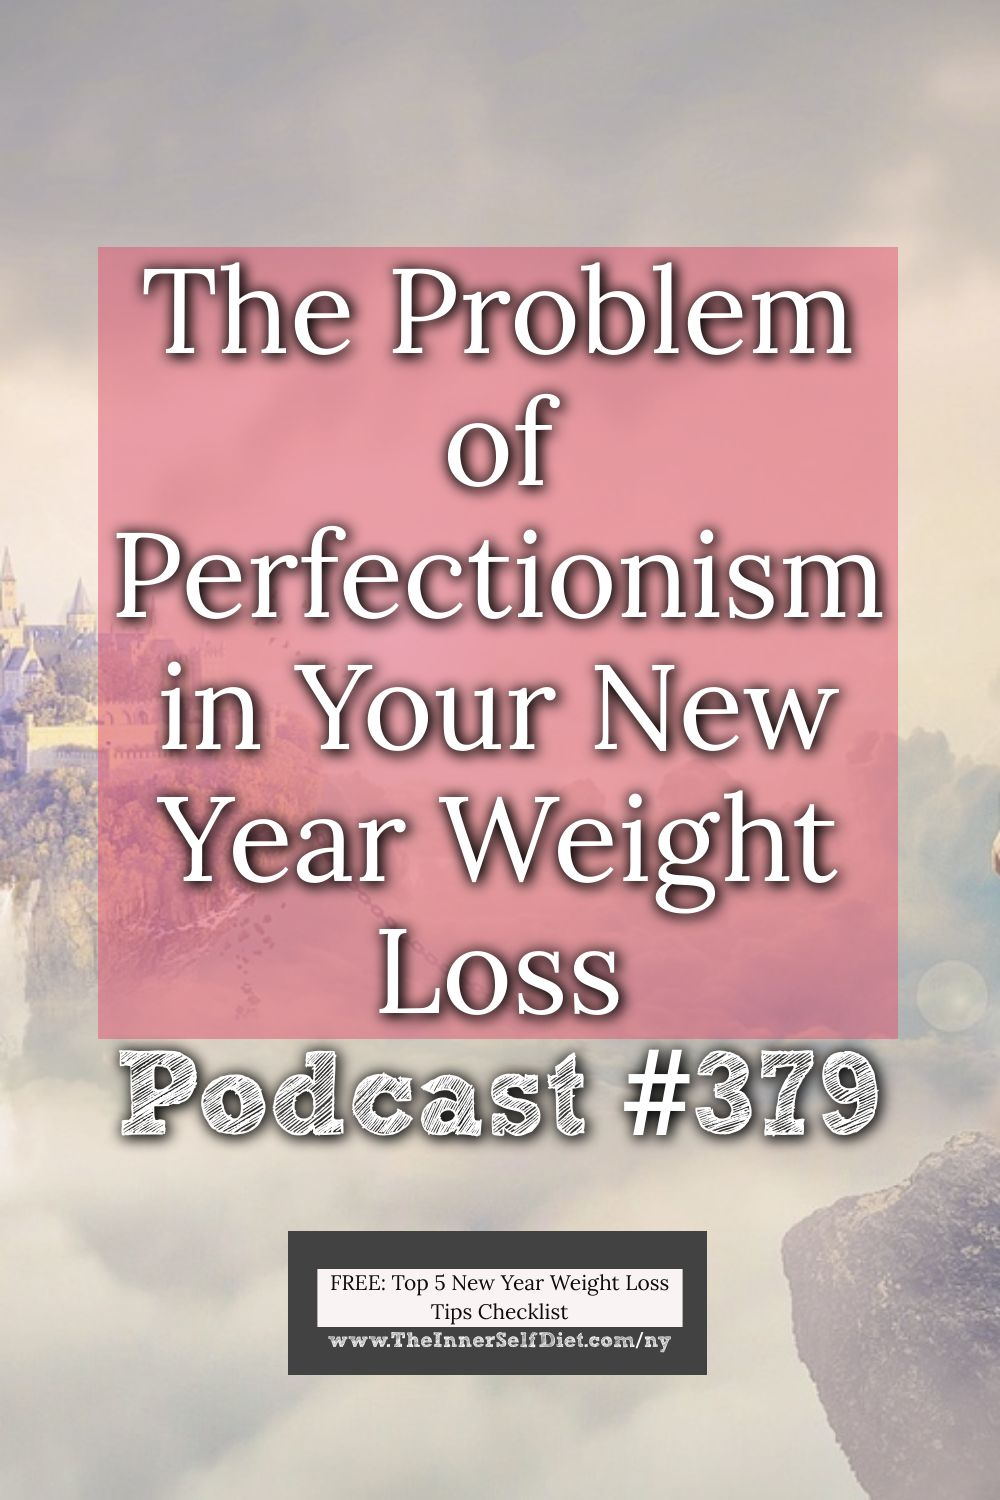 The Problem of Perfectionism in Your New Year Weight Loss [Podcast #379]